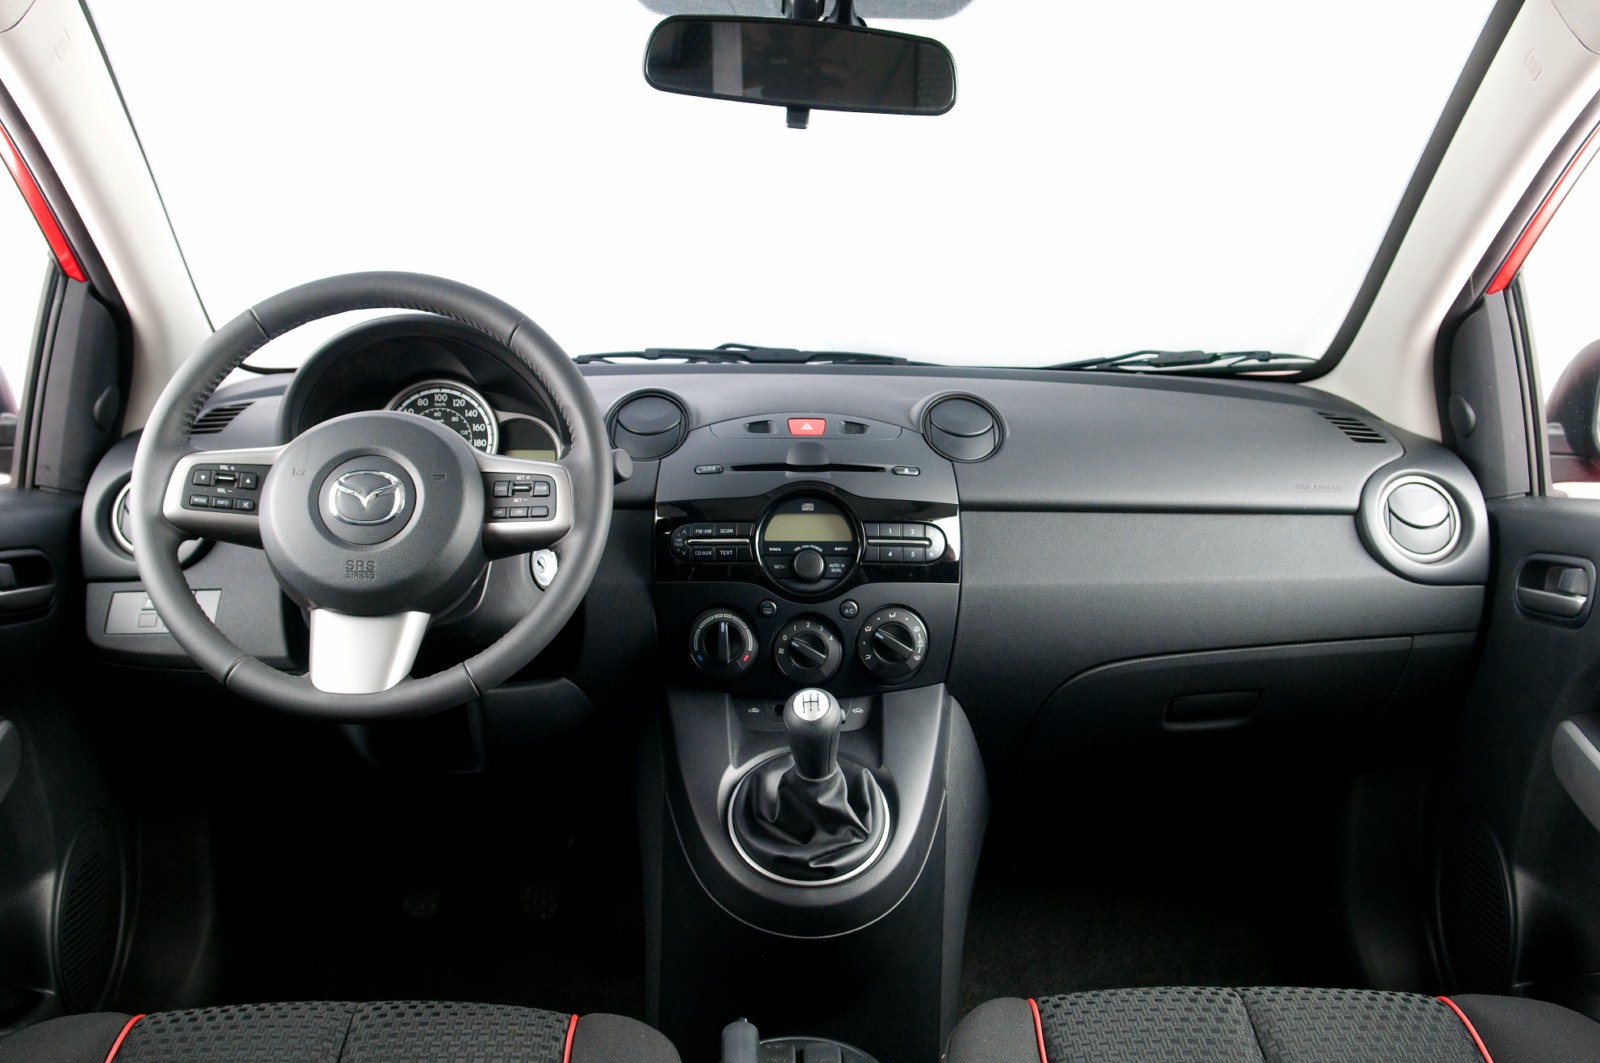 2011 Mazda2 Interior Revealed Still Not As Snazzy As Ford